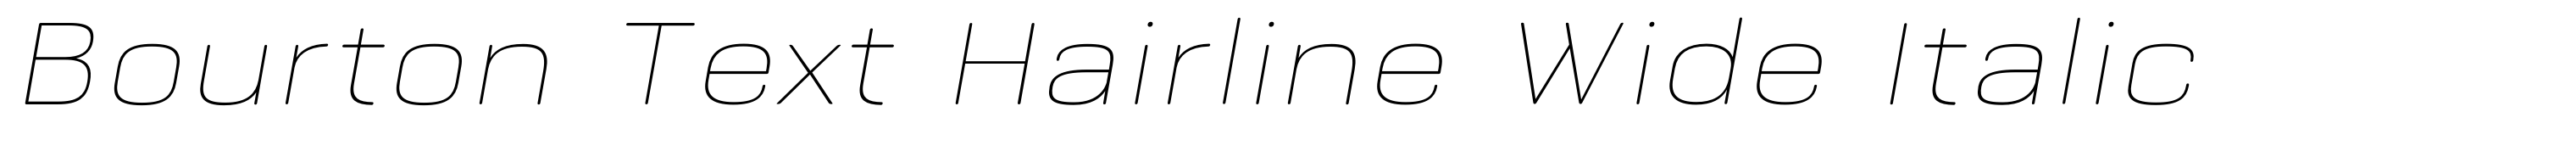 Bourton Text Hairline Wide Italic